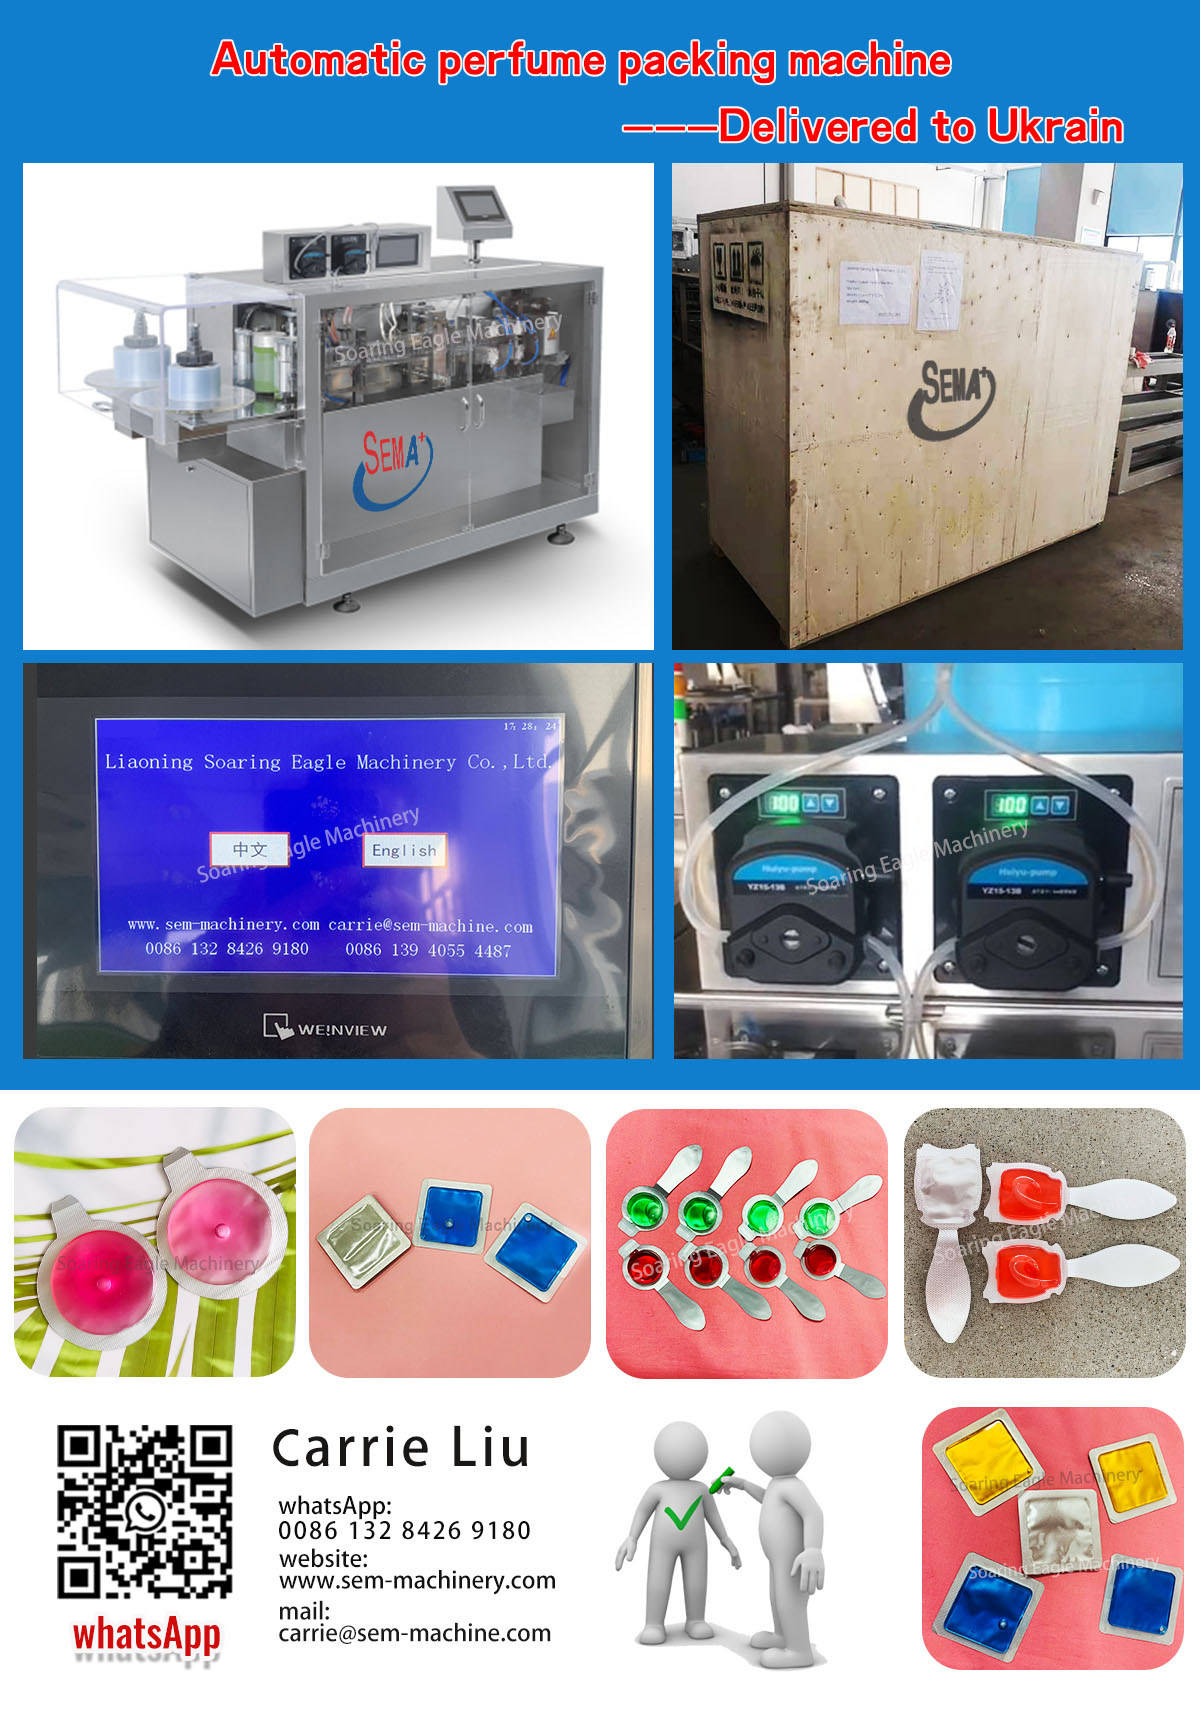 Automatic perfume packing machine  ——Deliver to Ukrain